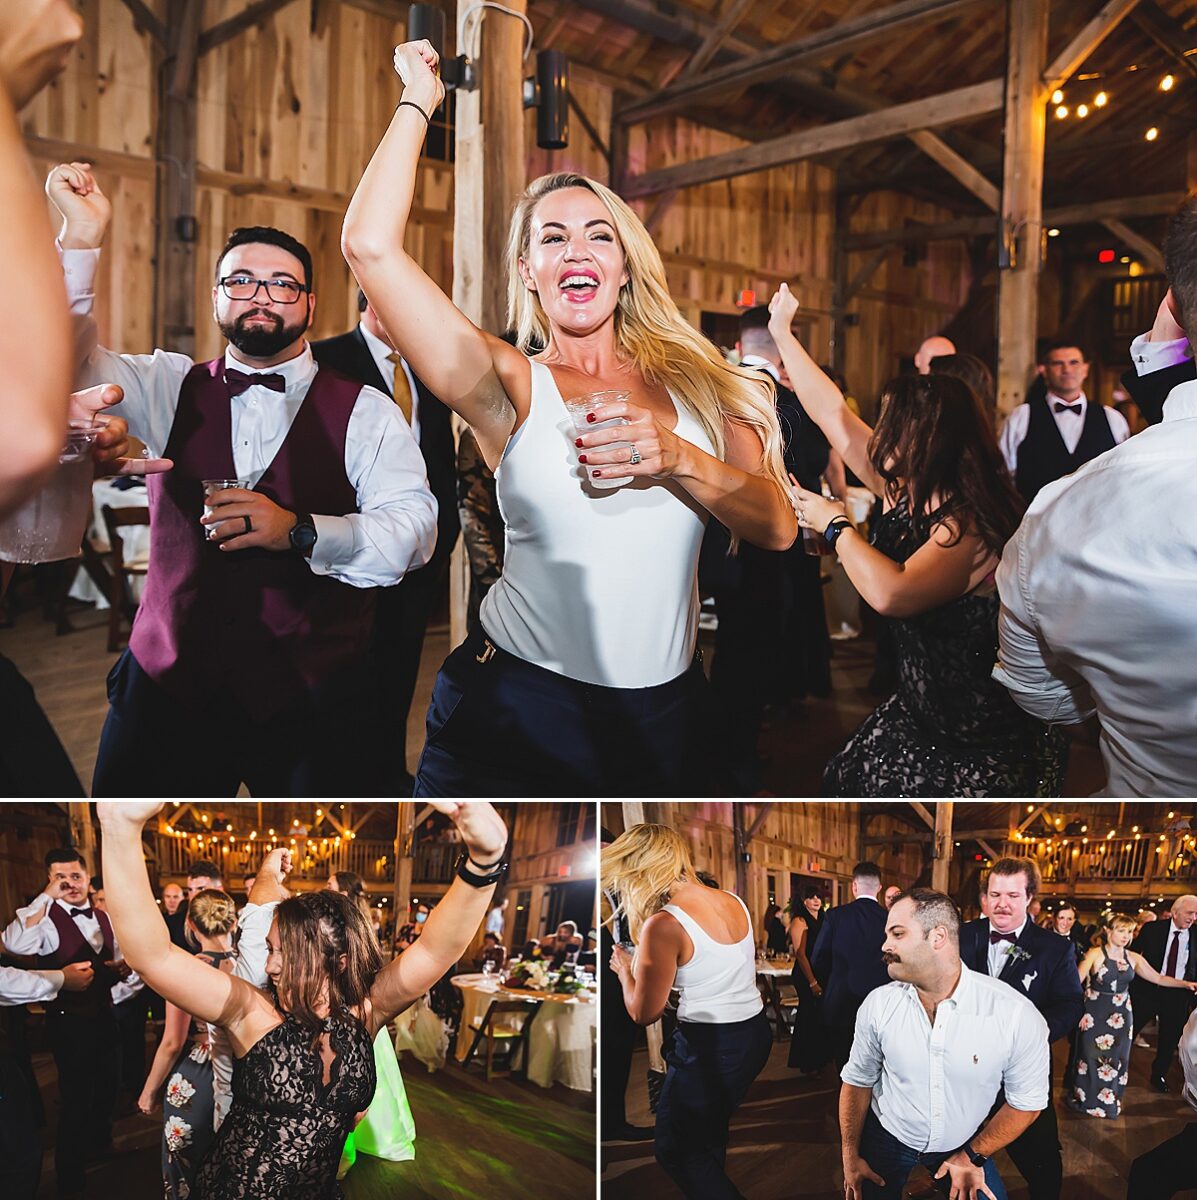 Lindley Farmstead at Chatham Hills Wedding | Indianapolis Wedding Photographers | casey and her camera